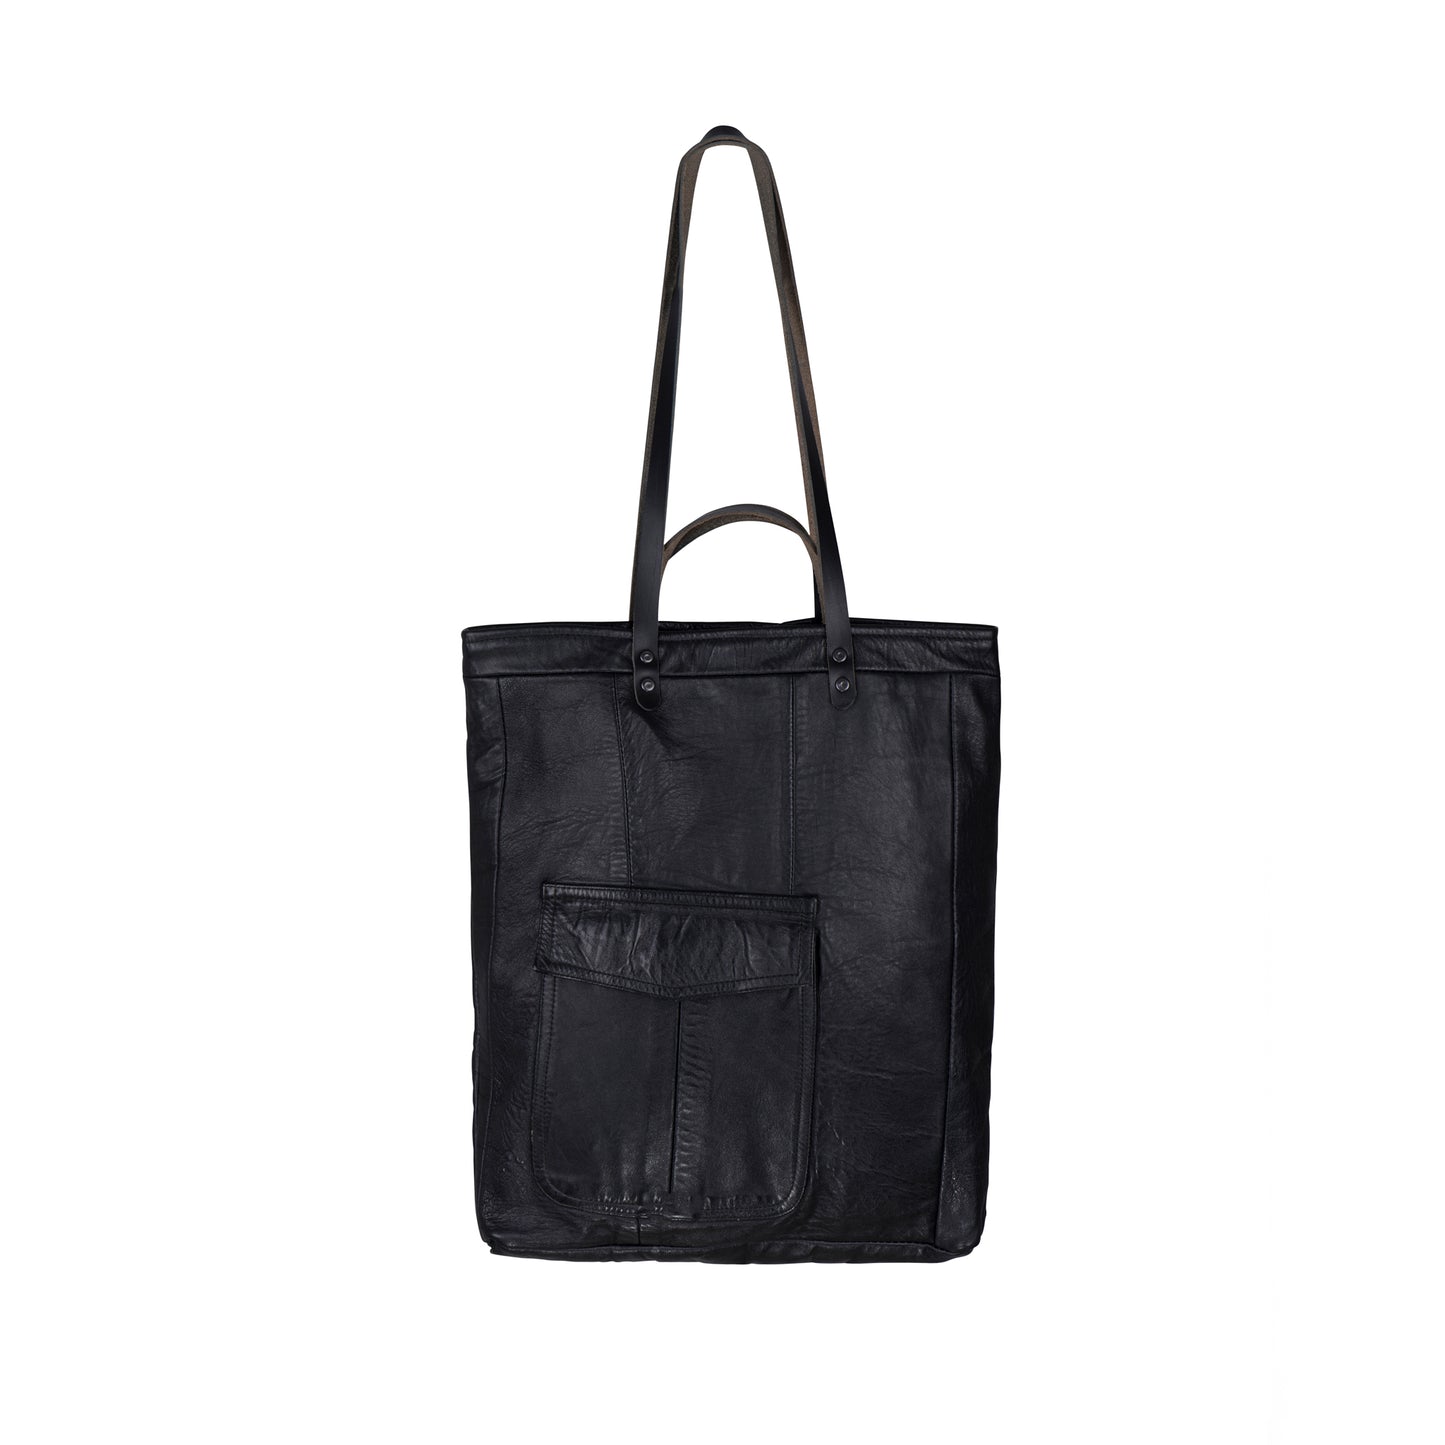 METANoIA black recycled leather tote handbag back with original leather piece wherever possible, every bag has a unique pocket placement.